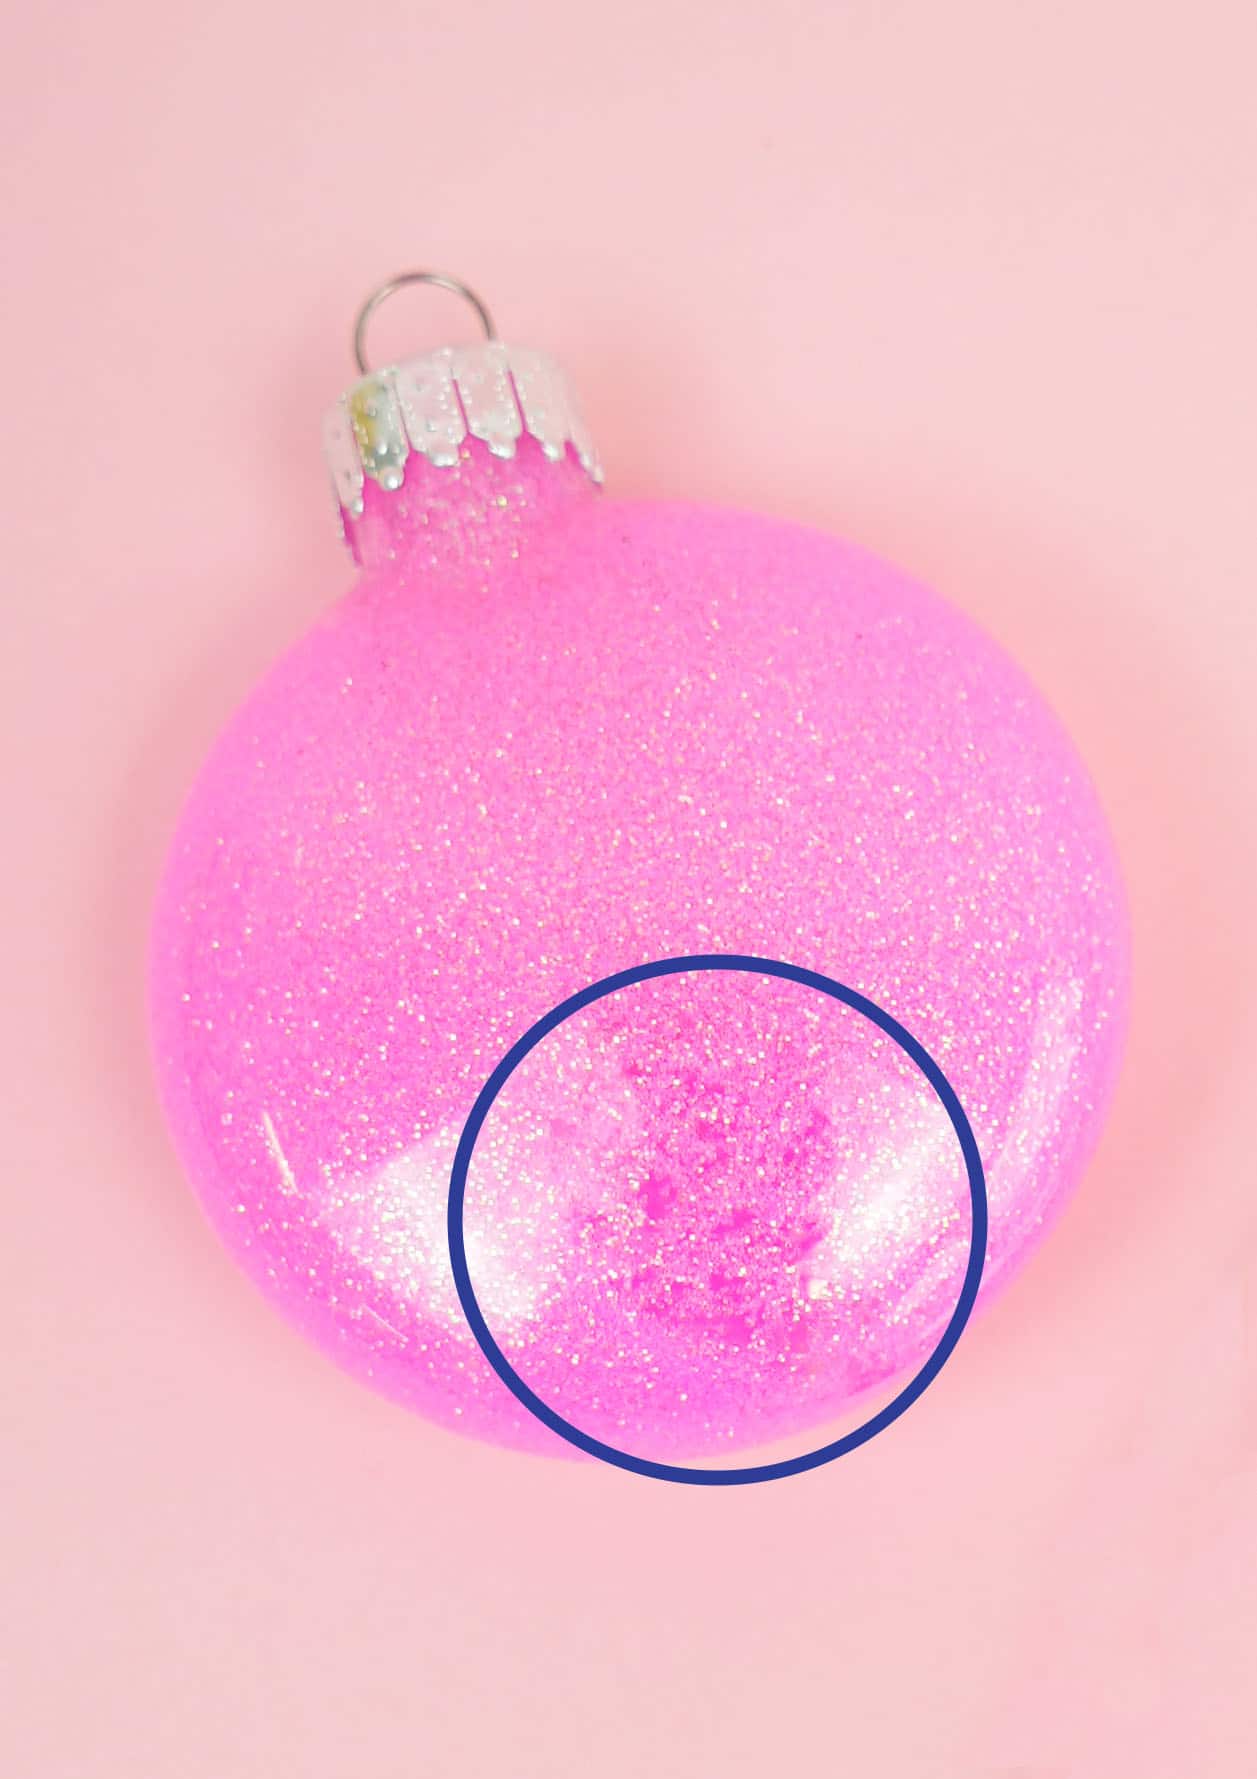 glitter ornaments are sitting on a pink surface with spot circled